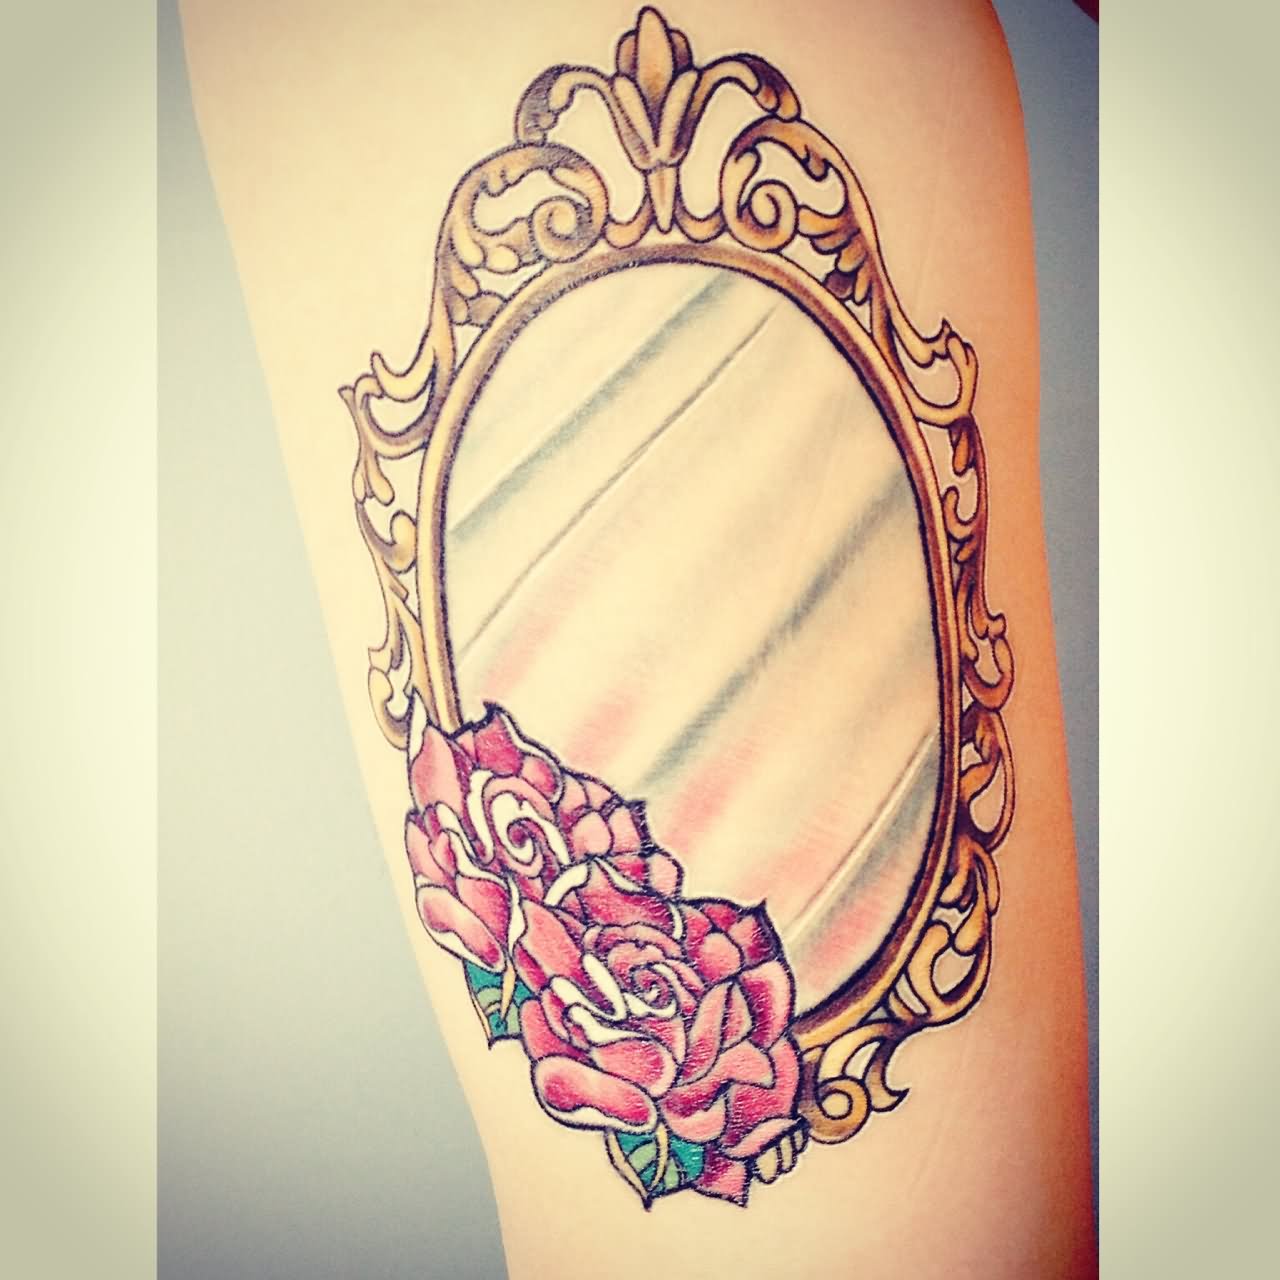 Roses And Girly Mirror Tattoo